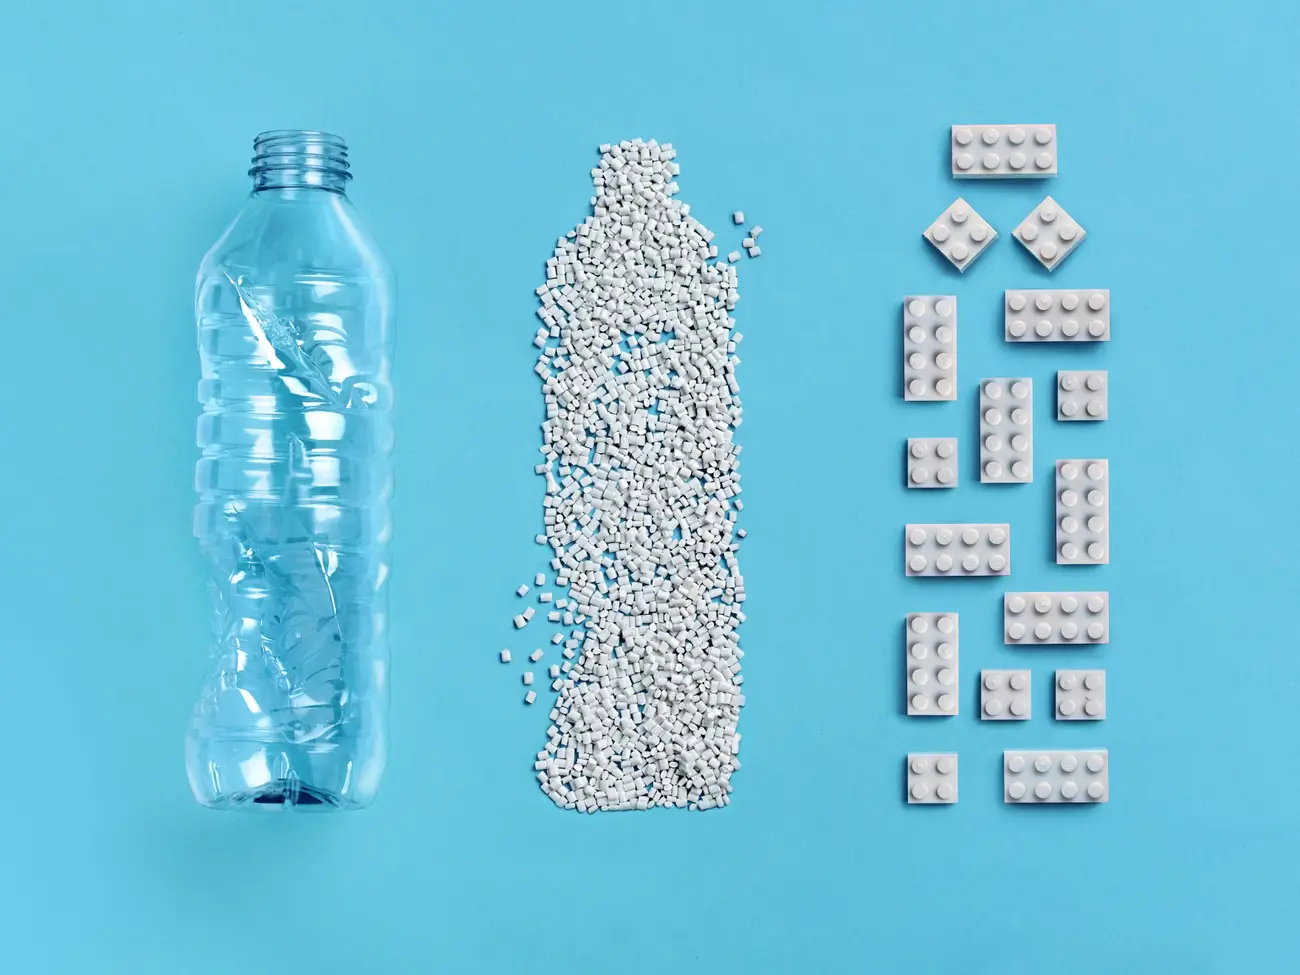 Recycled PET bottles are transformed into plastic granules and repurposed as sustainability building blocks.